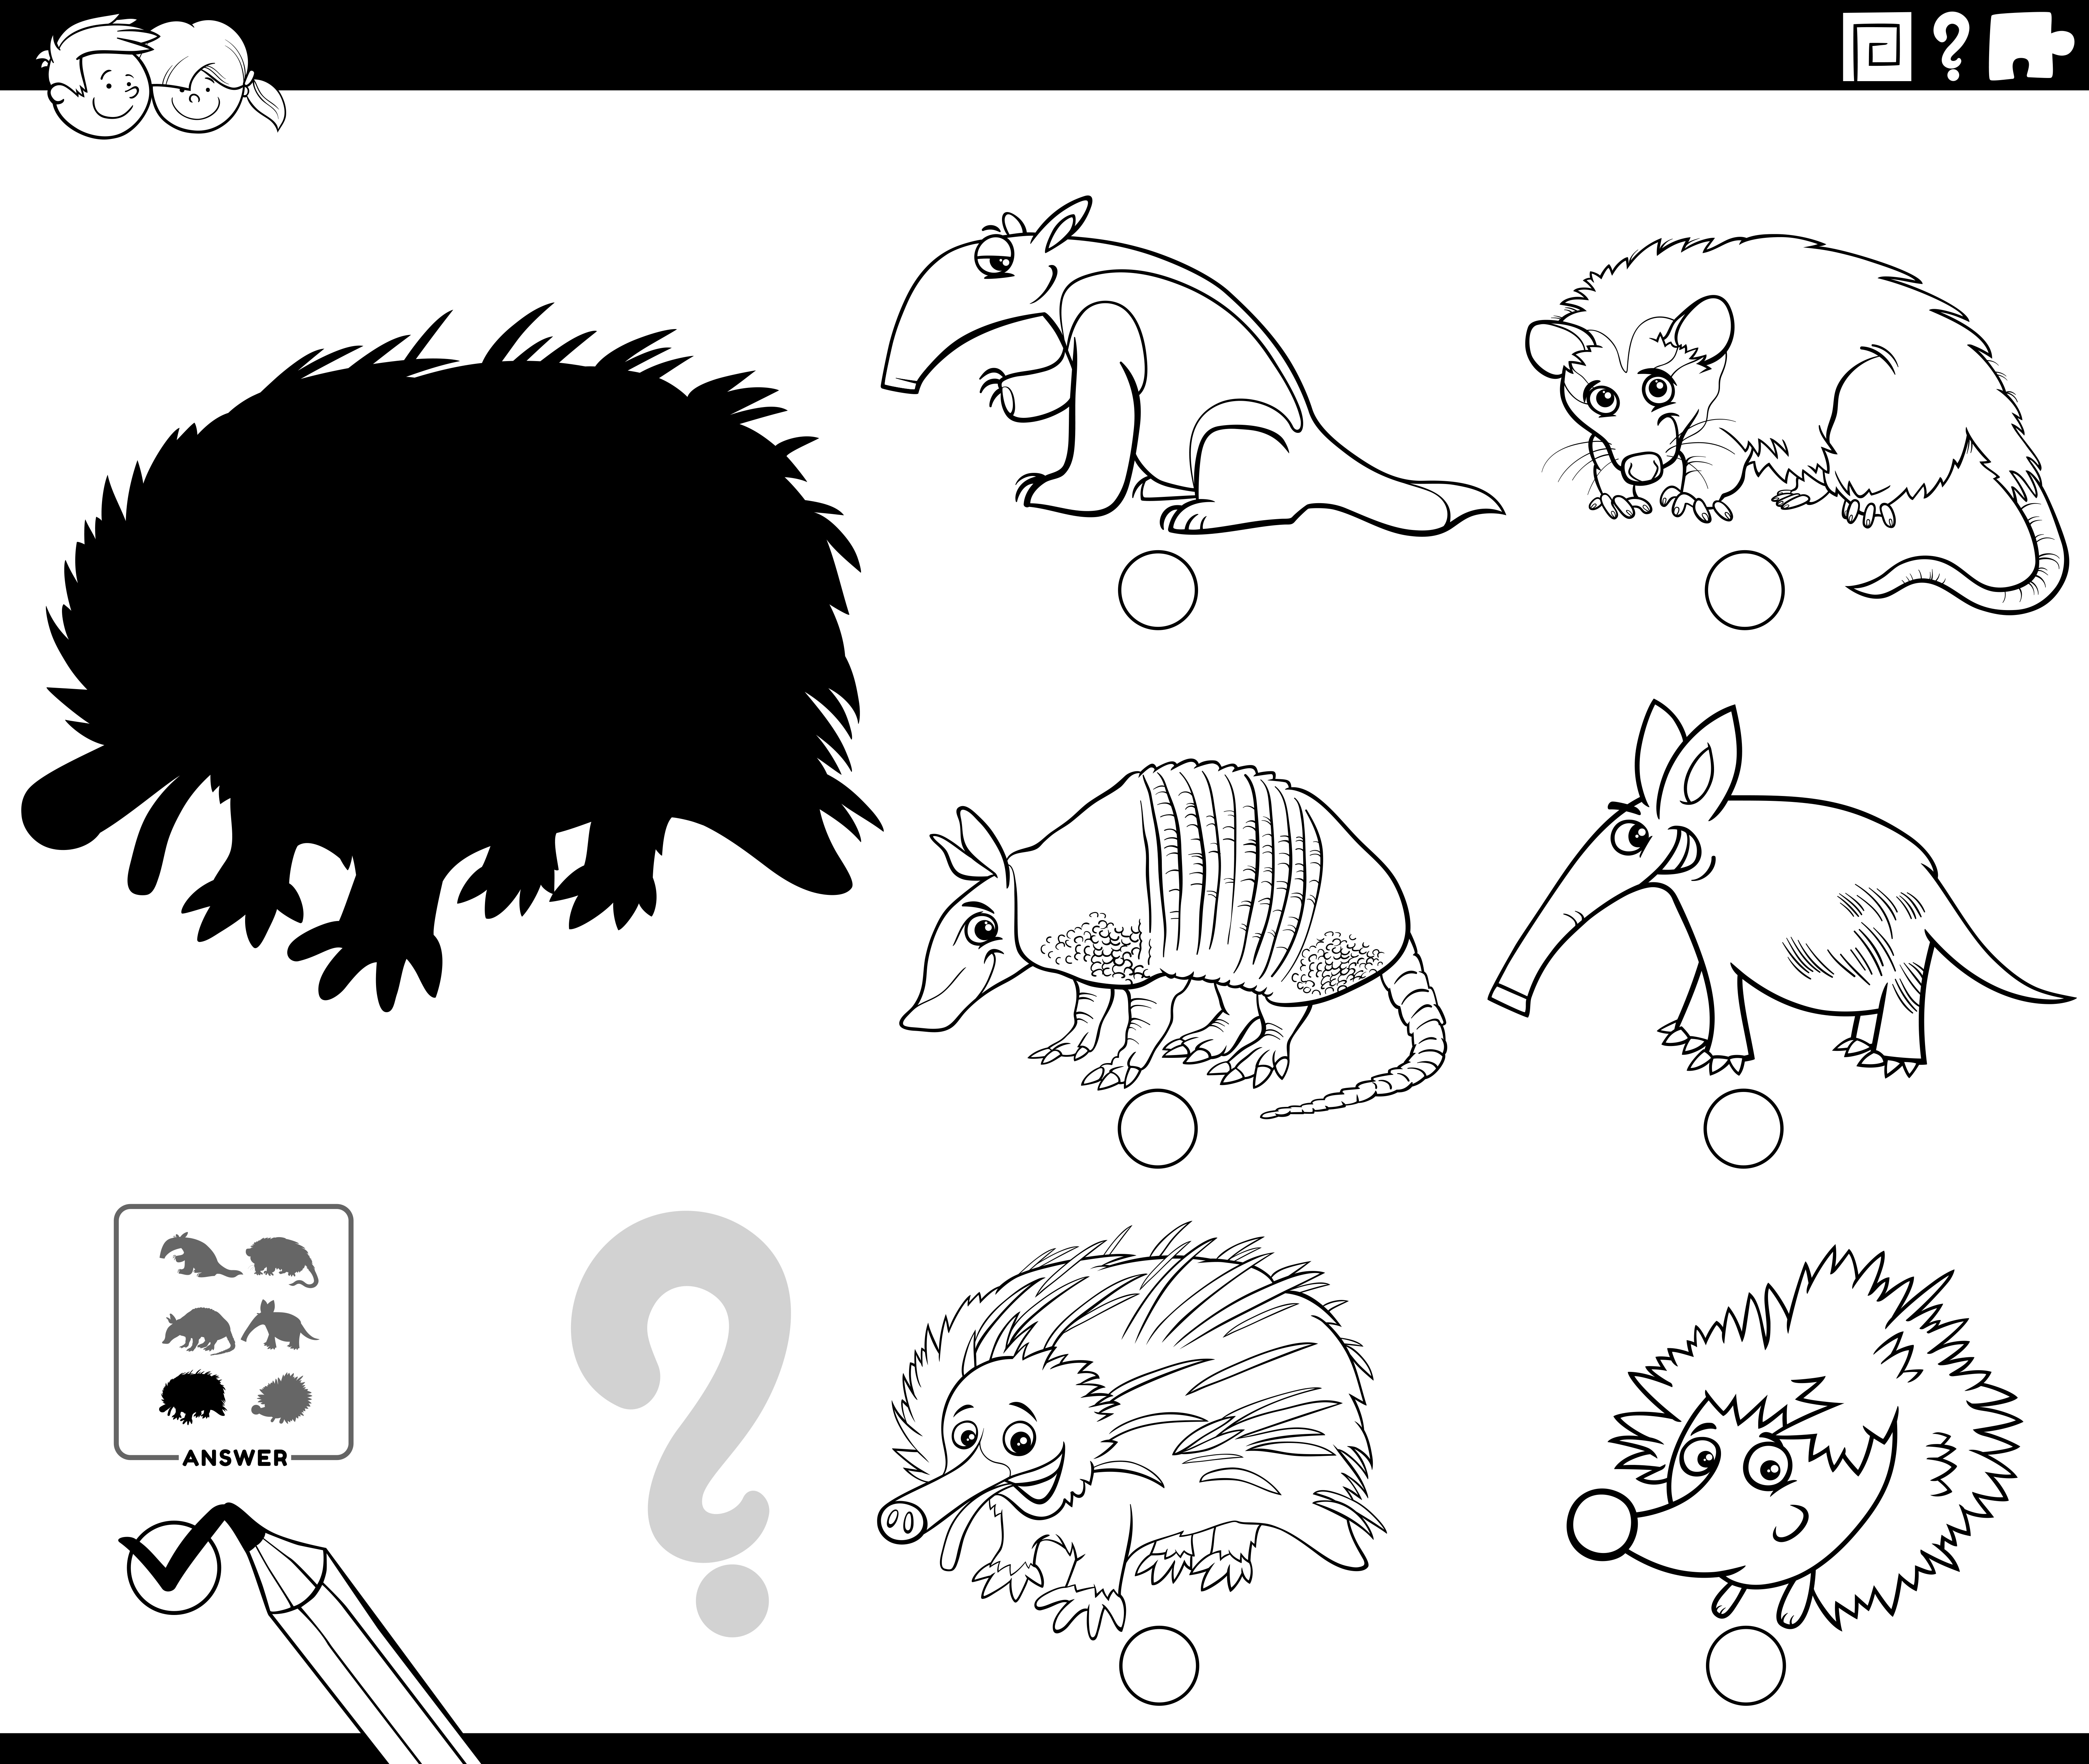 shadows game with cartoon wild animals coloring book page 20 ...